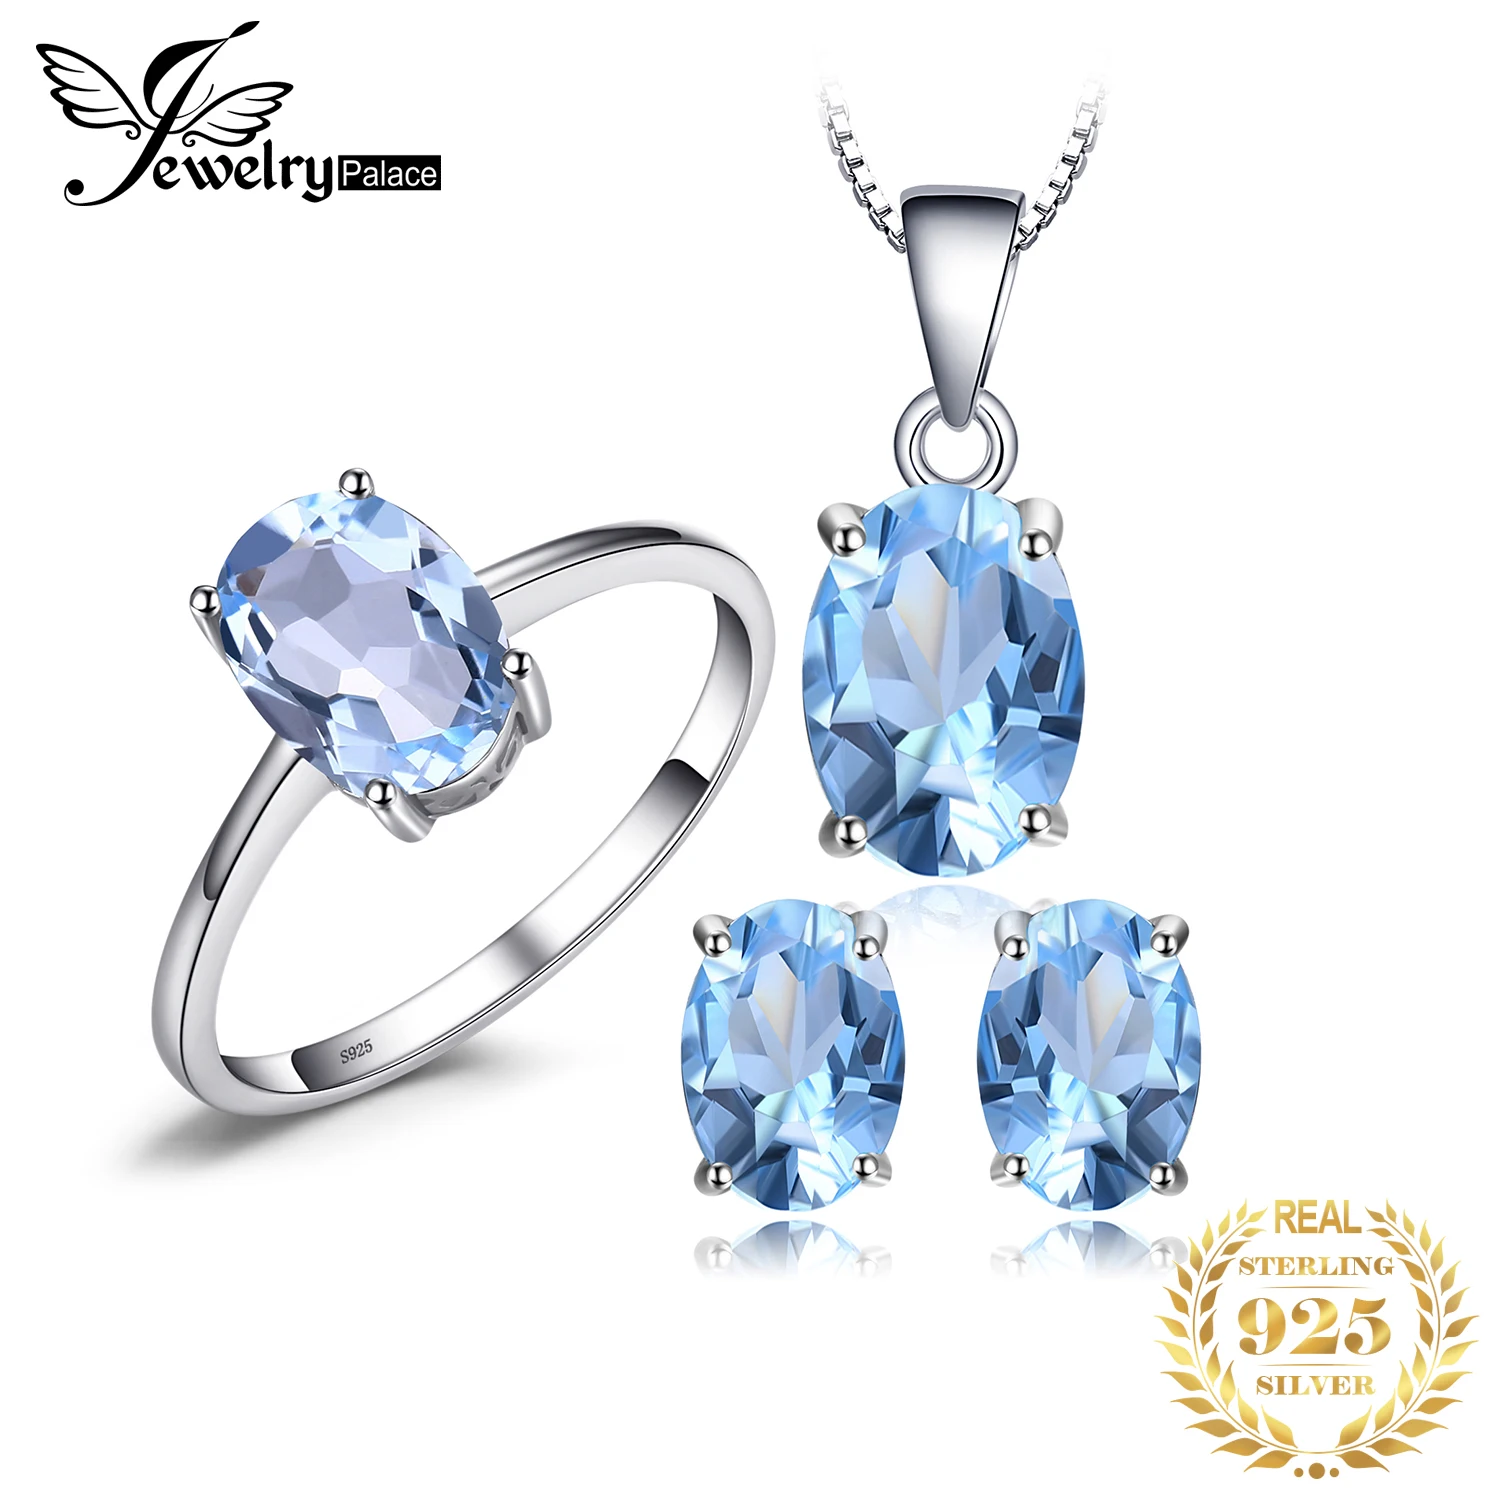 Details about   Natural Sky Blue Topaz Gemstone Solid 925 Silver Luxury Women Jewelry Set